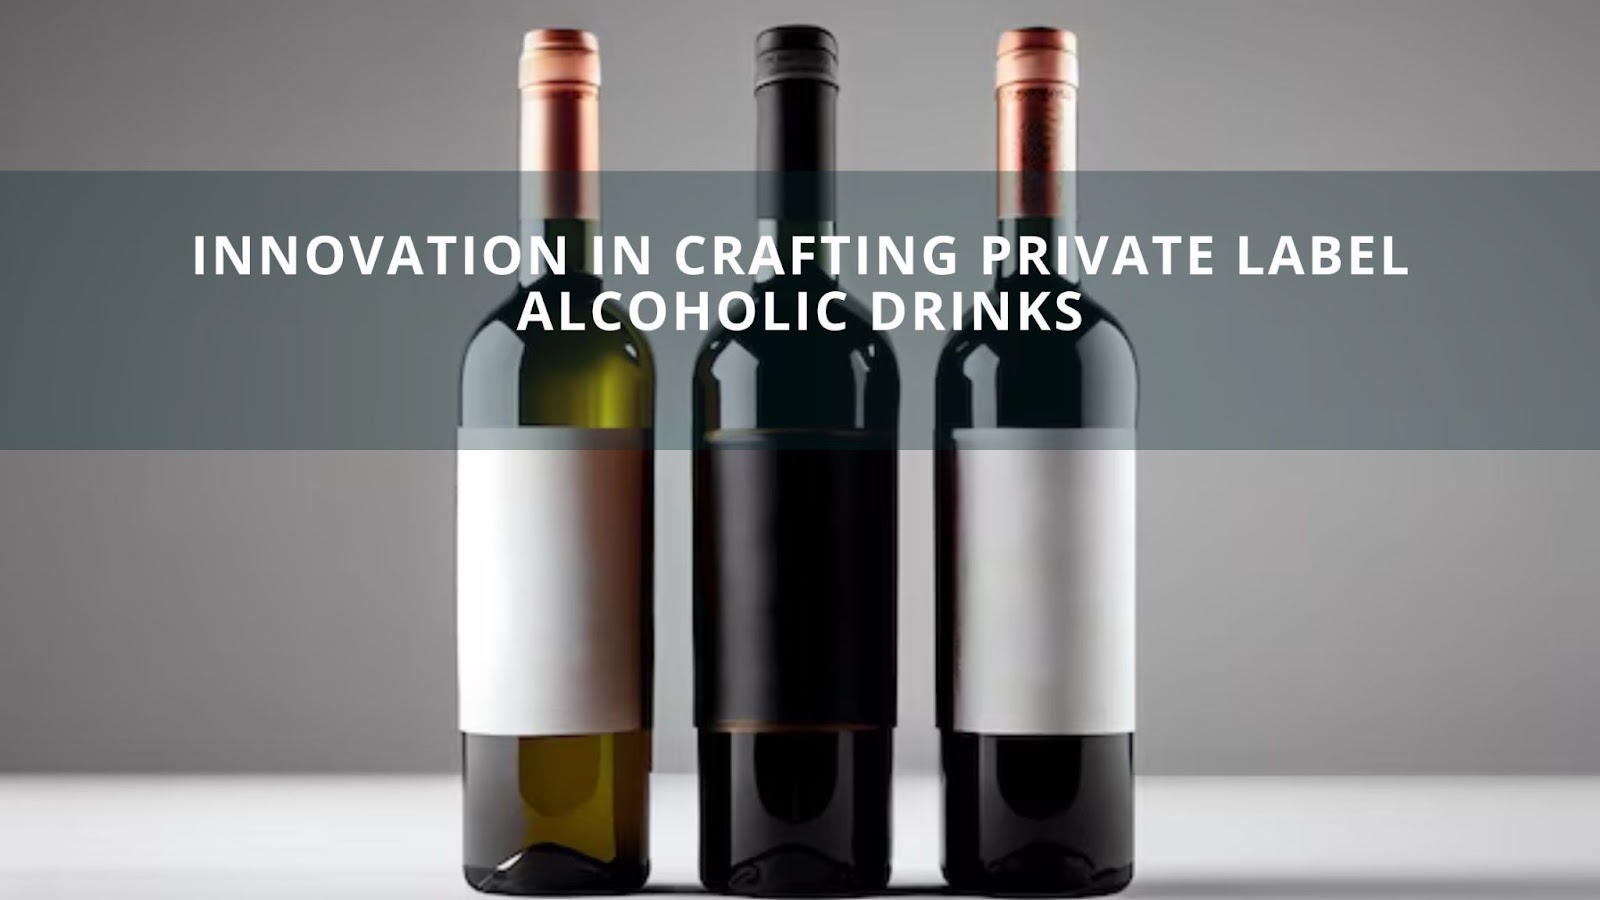 Innovation in Crafting Private Label Alcoholic Drinks